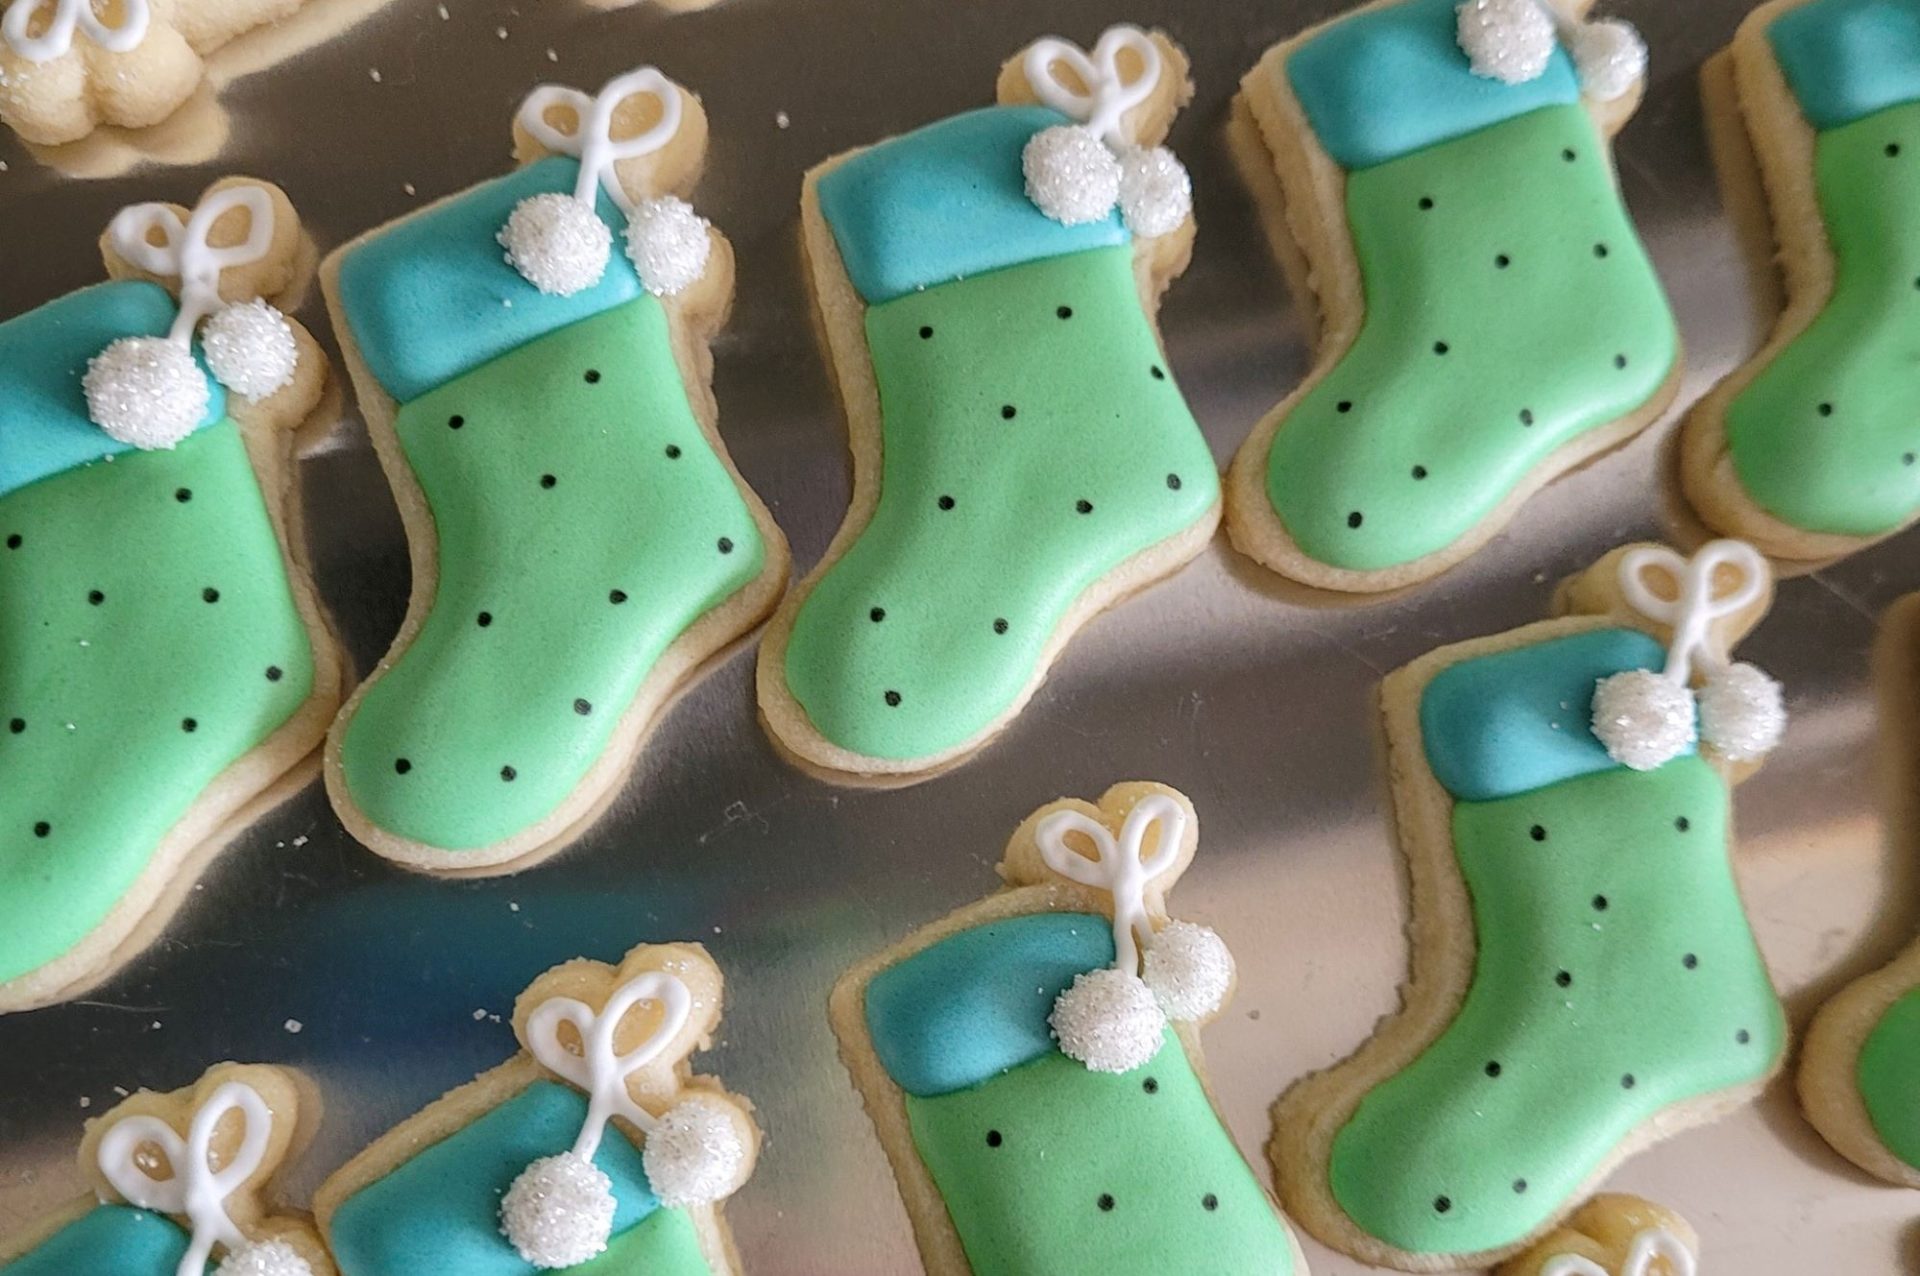 Rows of stocking shaped sugar cookies withh green and blue frosting.